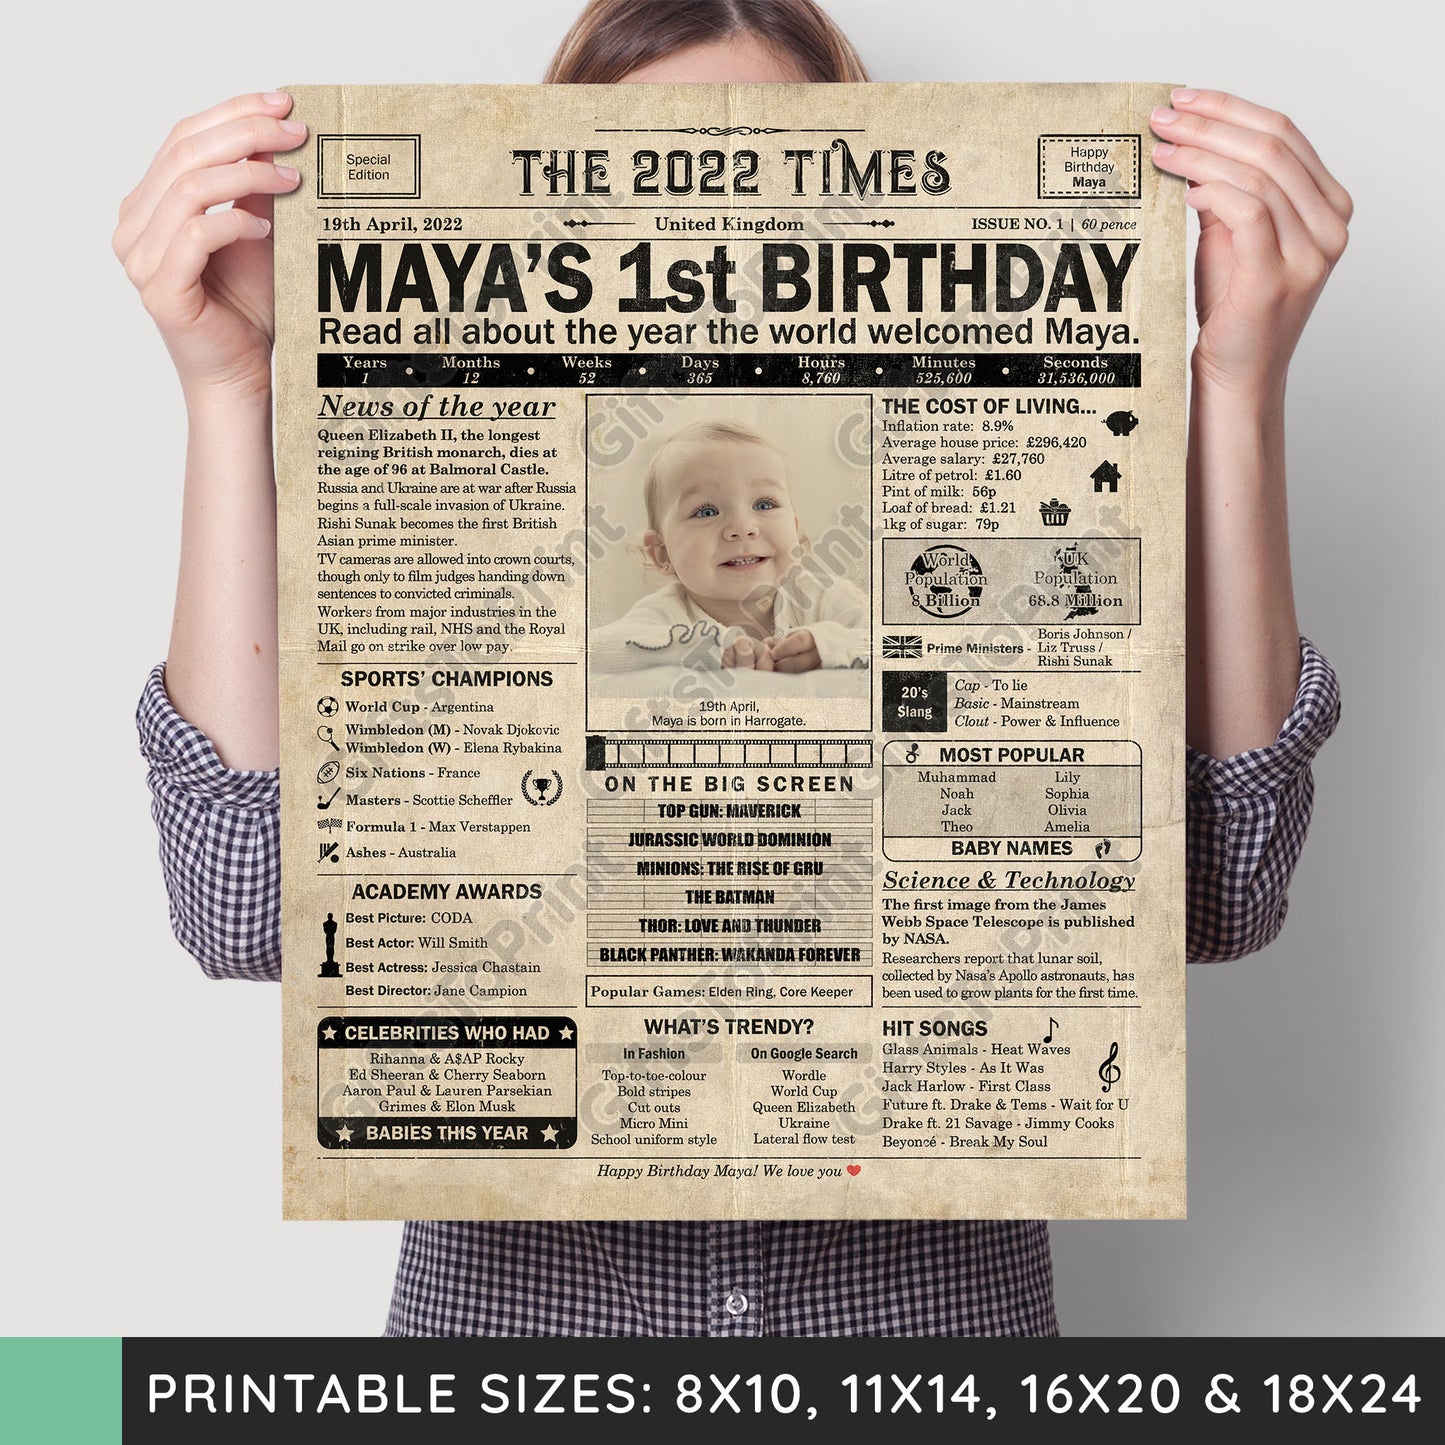 Personalised 1st Birthday Gift: A Printable UK Birthday Poster of 2022